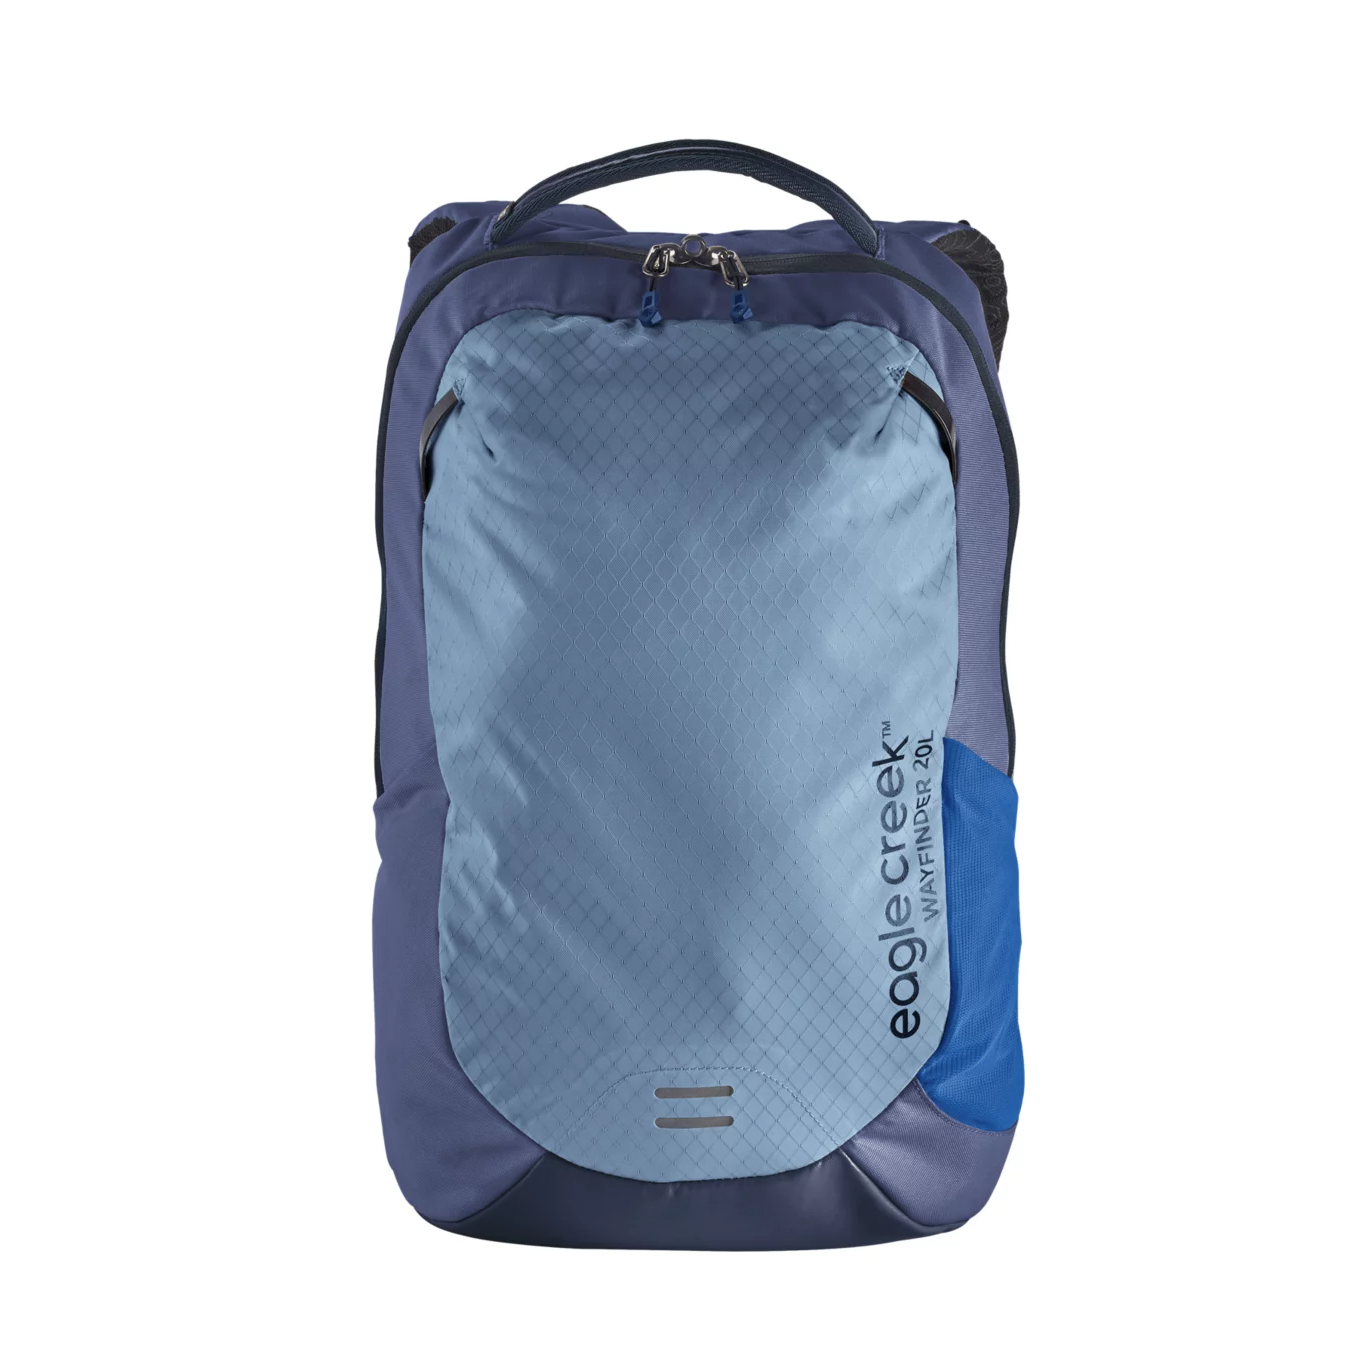 Eagle Creek Women's Wayfinder 20L Backpack (Arctic Blue or Night Blue) $25.73 + Free Store Pickup at REI or FS on $50+